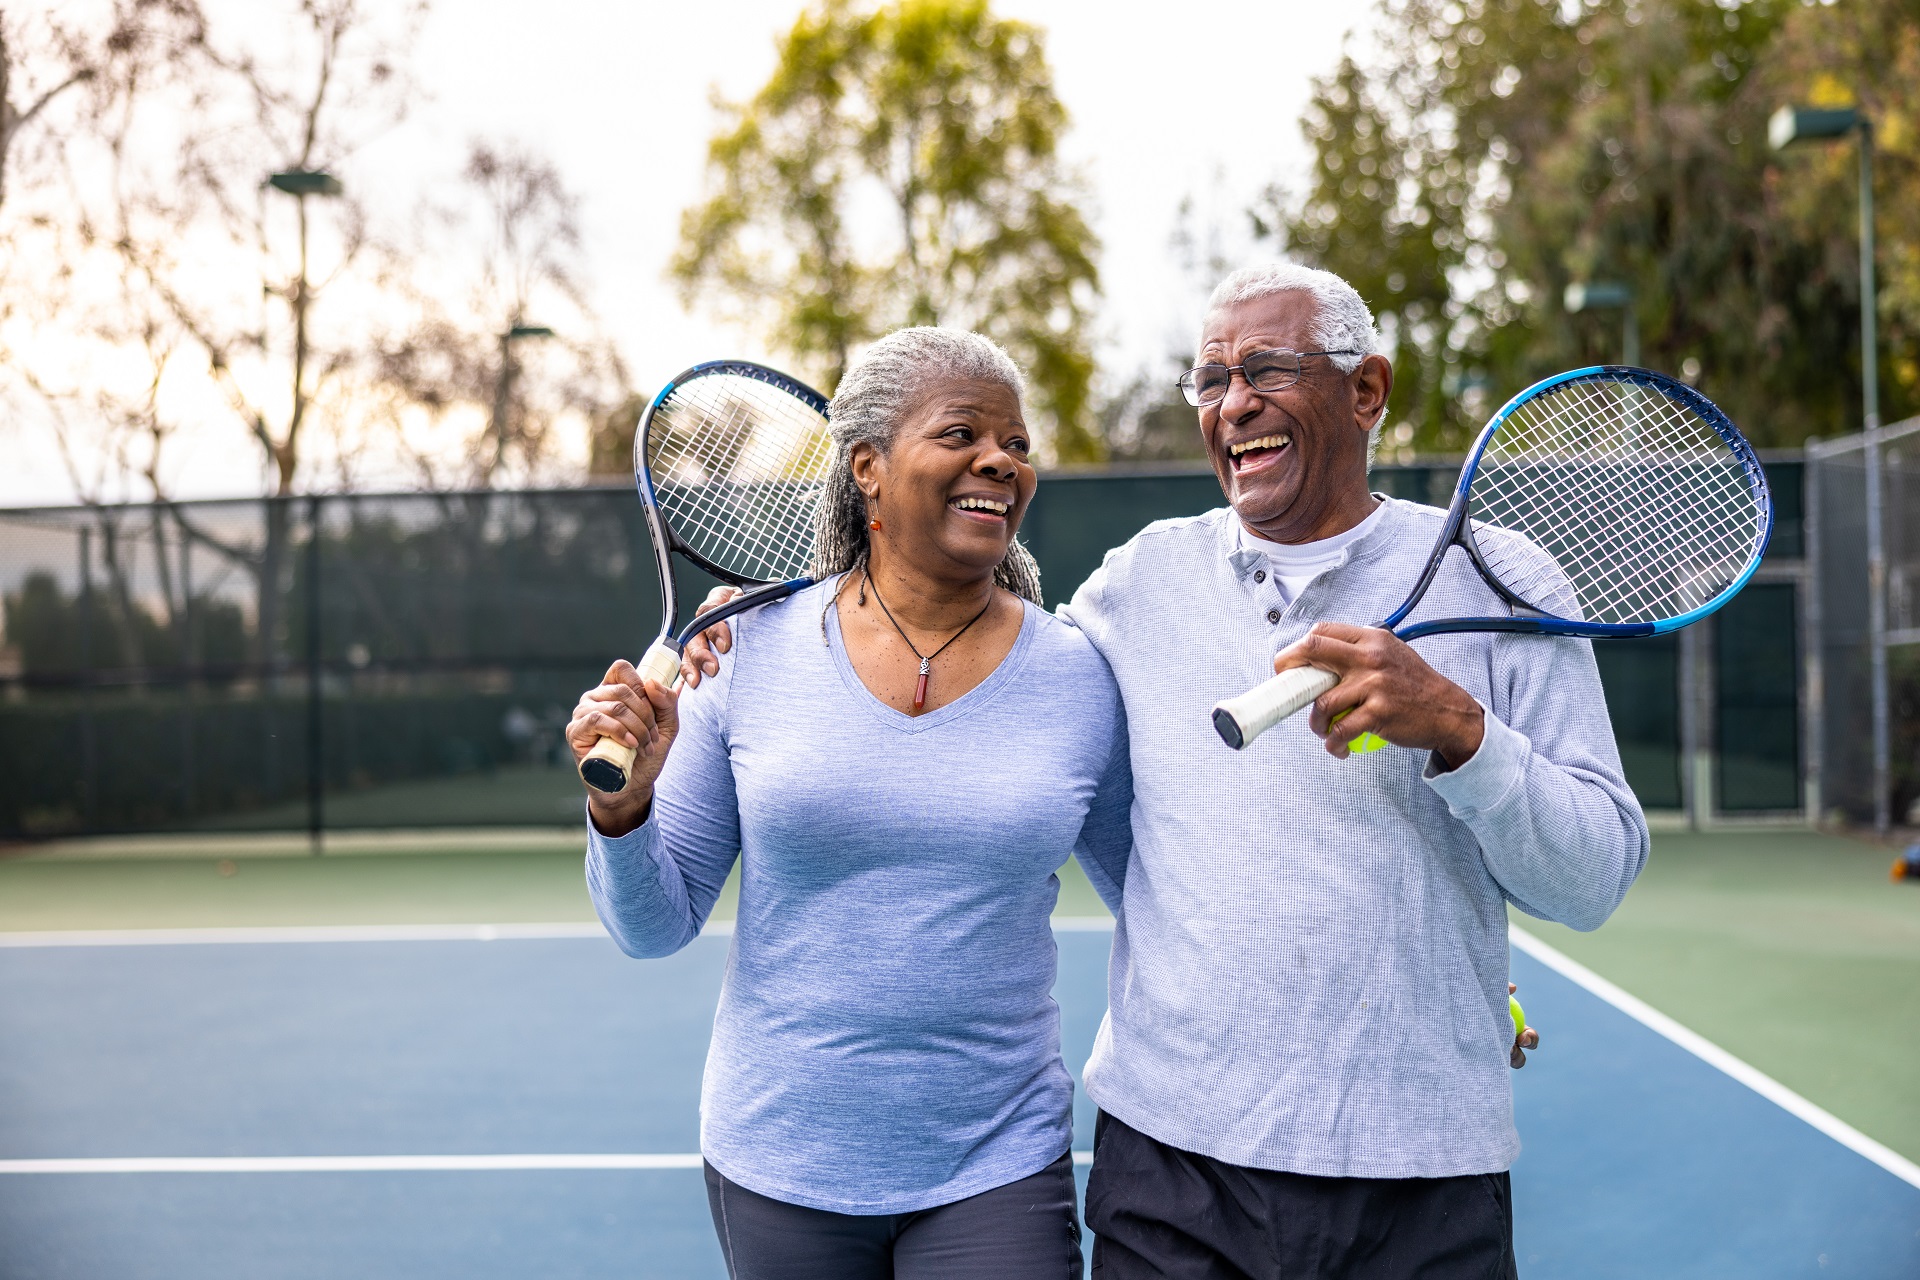 From Tennis Elbow to Backhand Bliss: Rehabbing Your Way Back on the Court